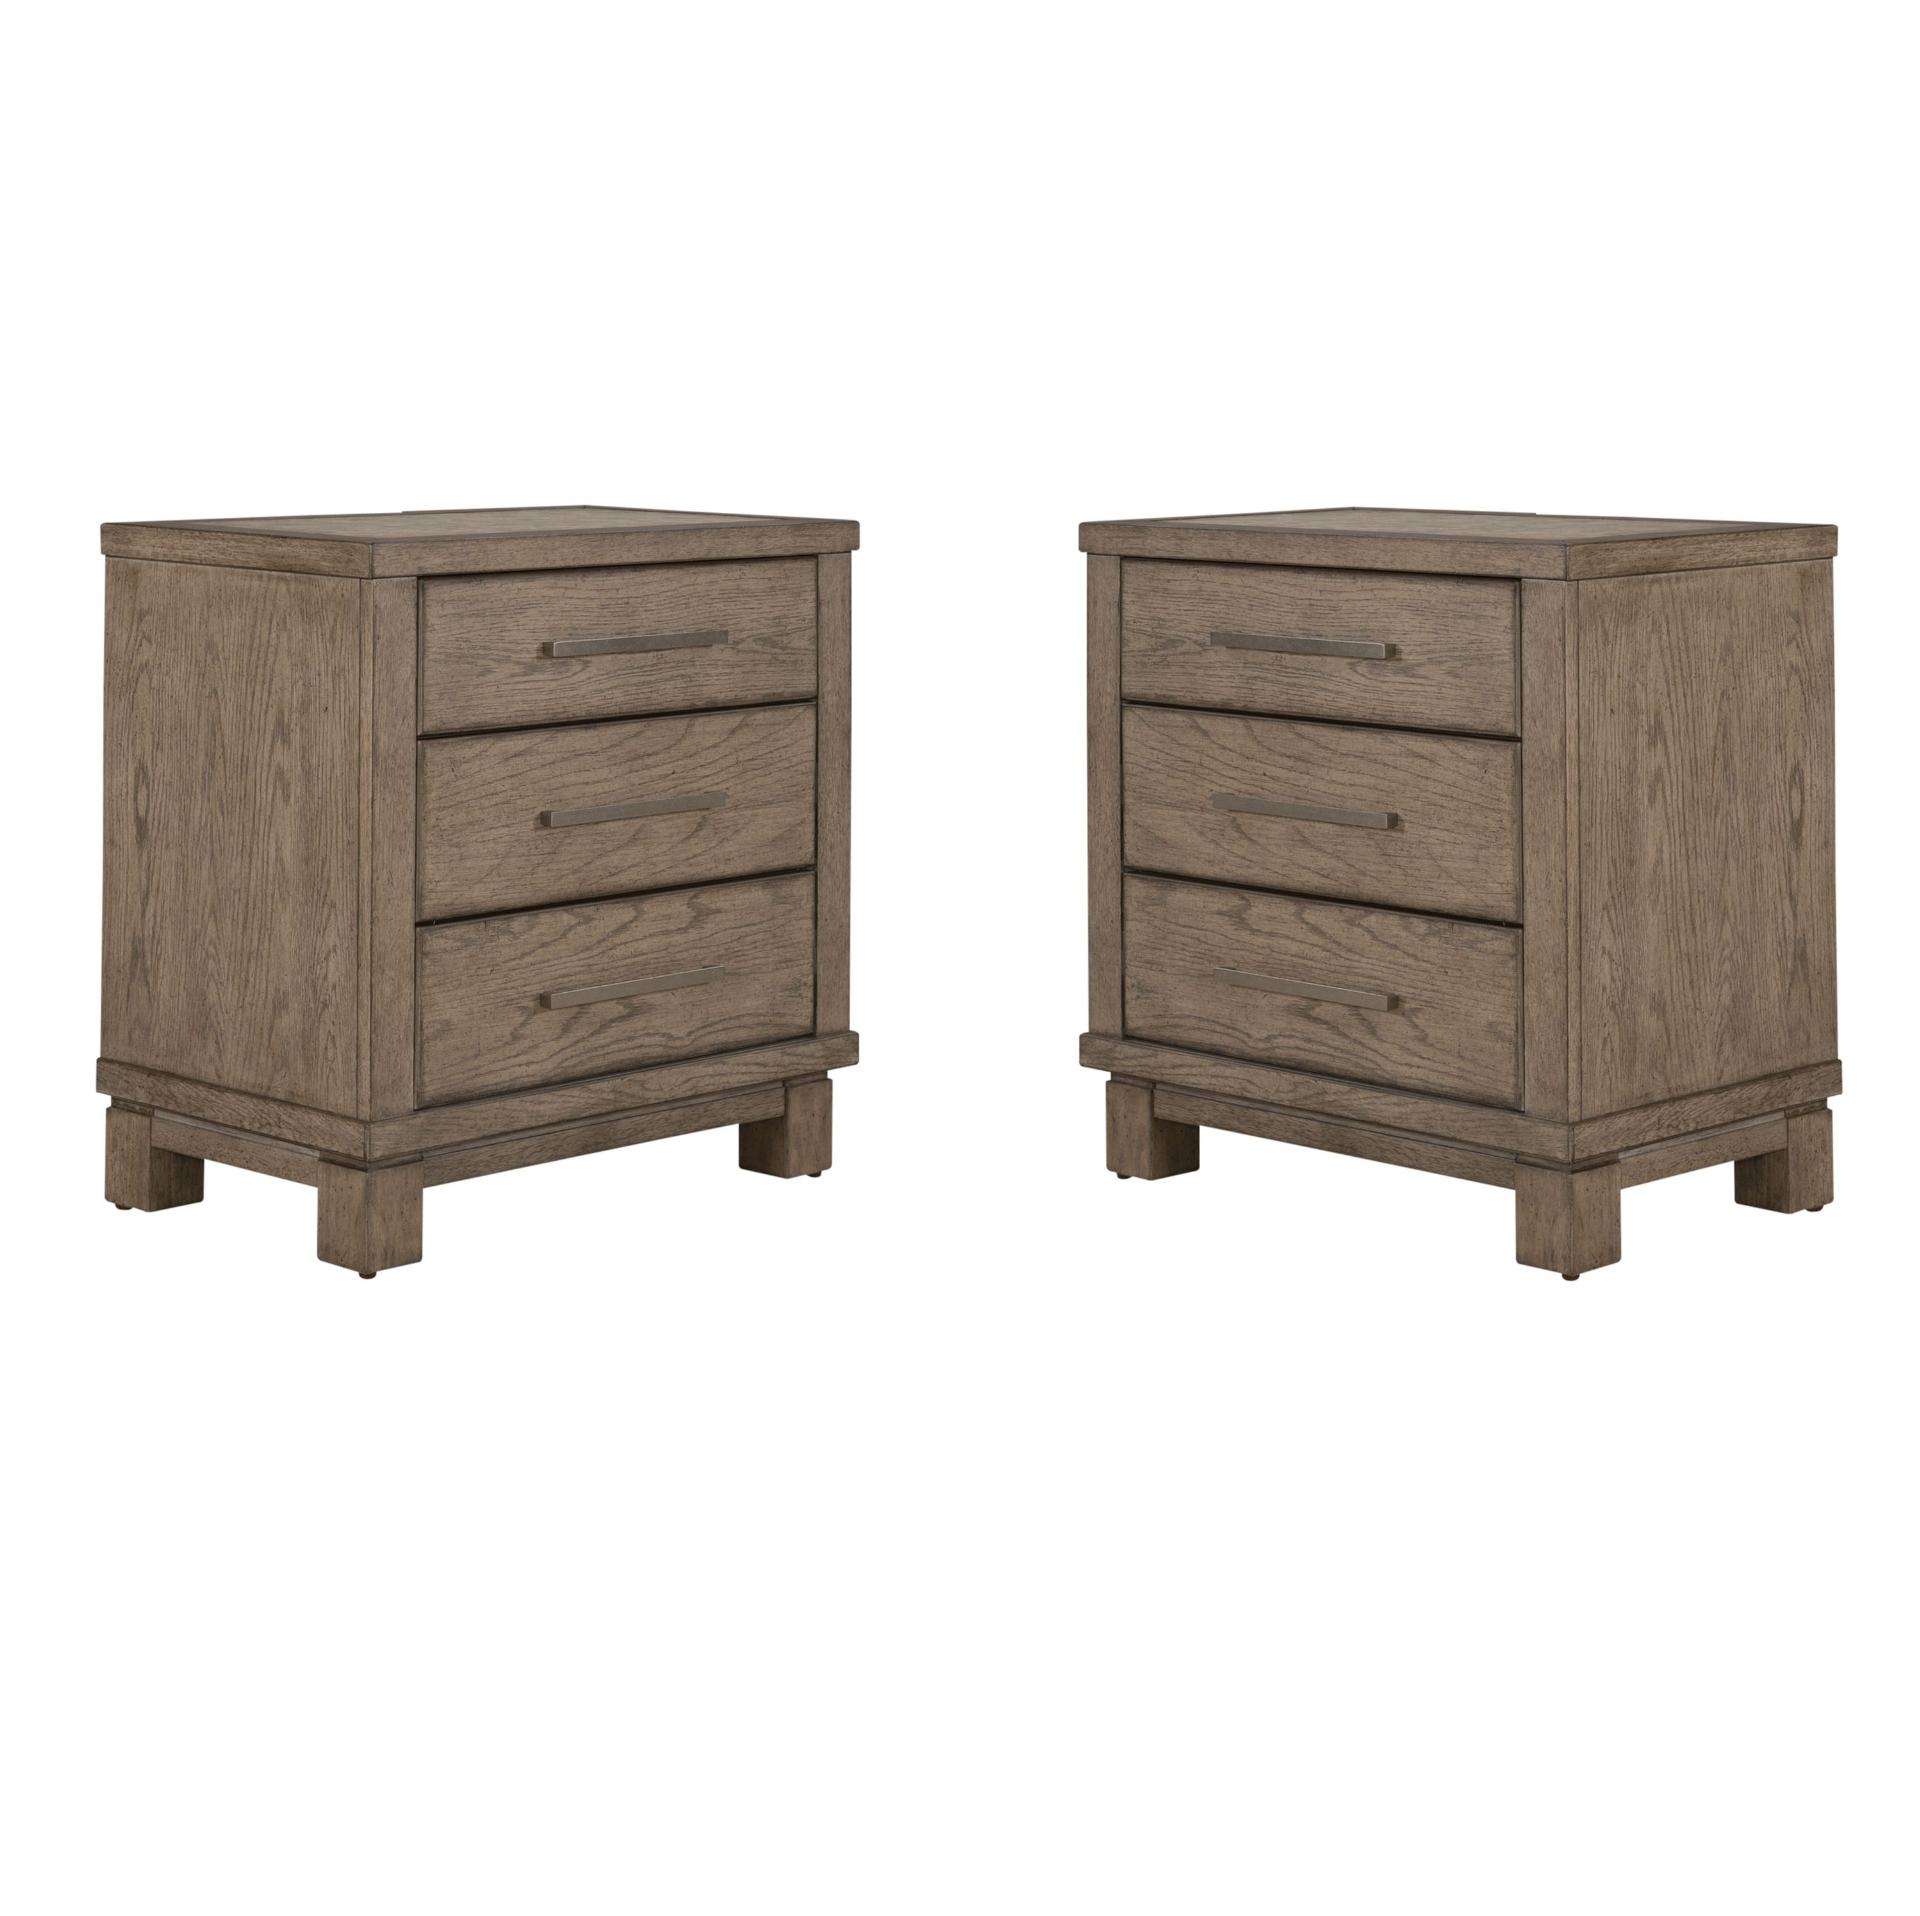 Liberty Furniture Canyon Road (876-BR) Nightstand Set